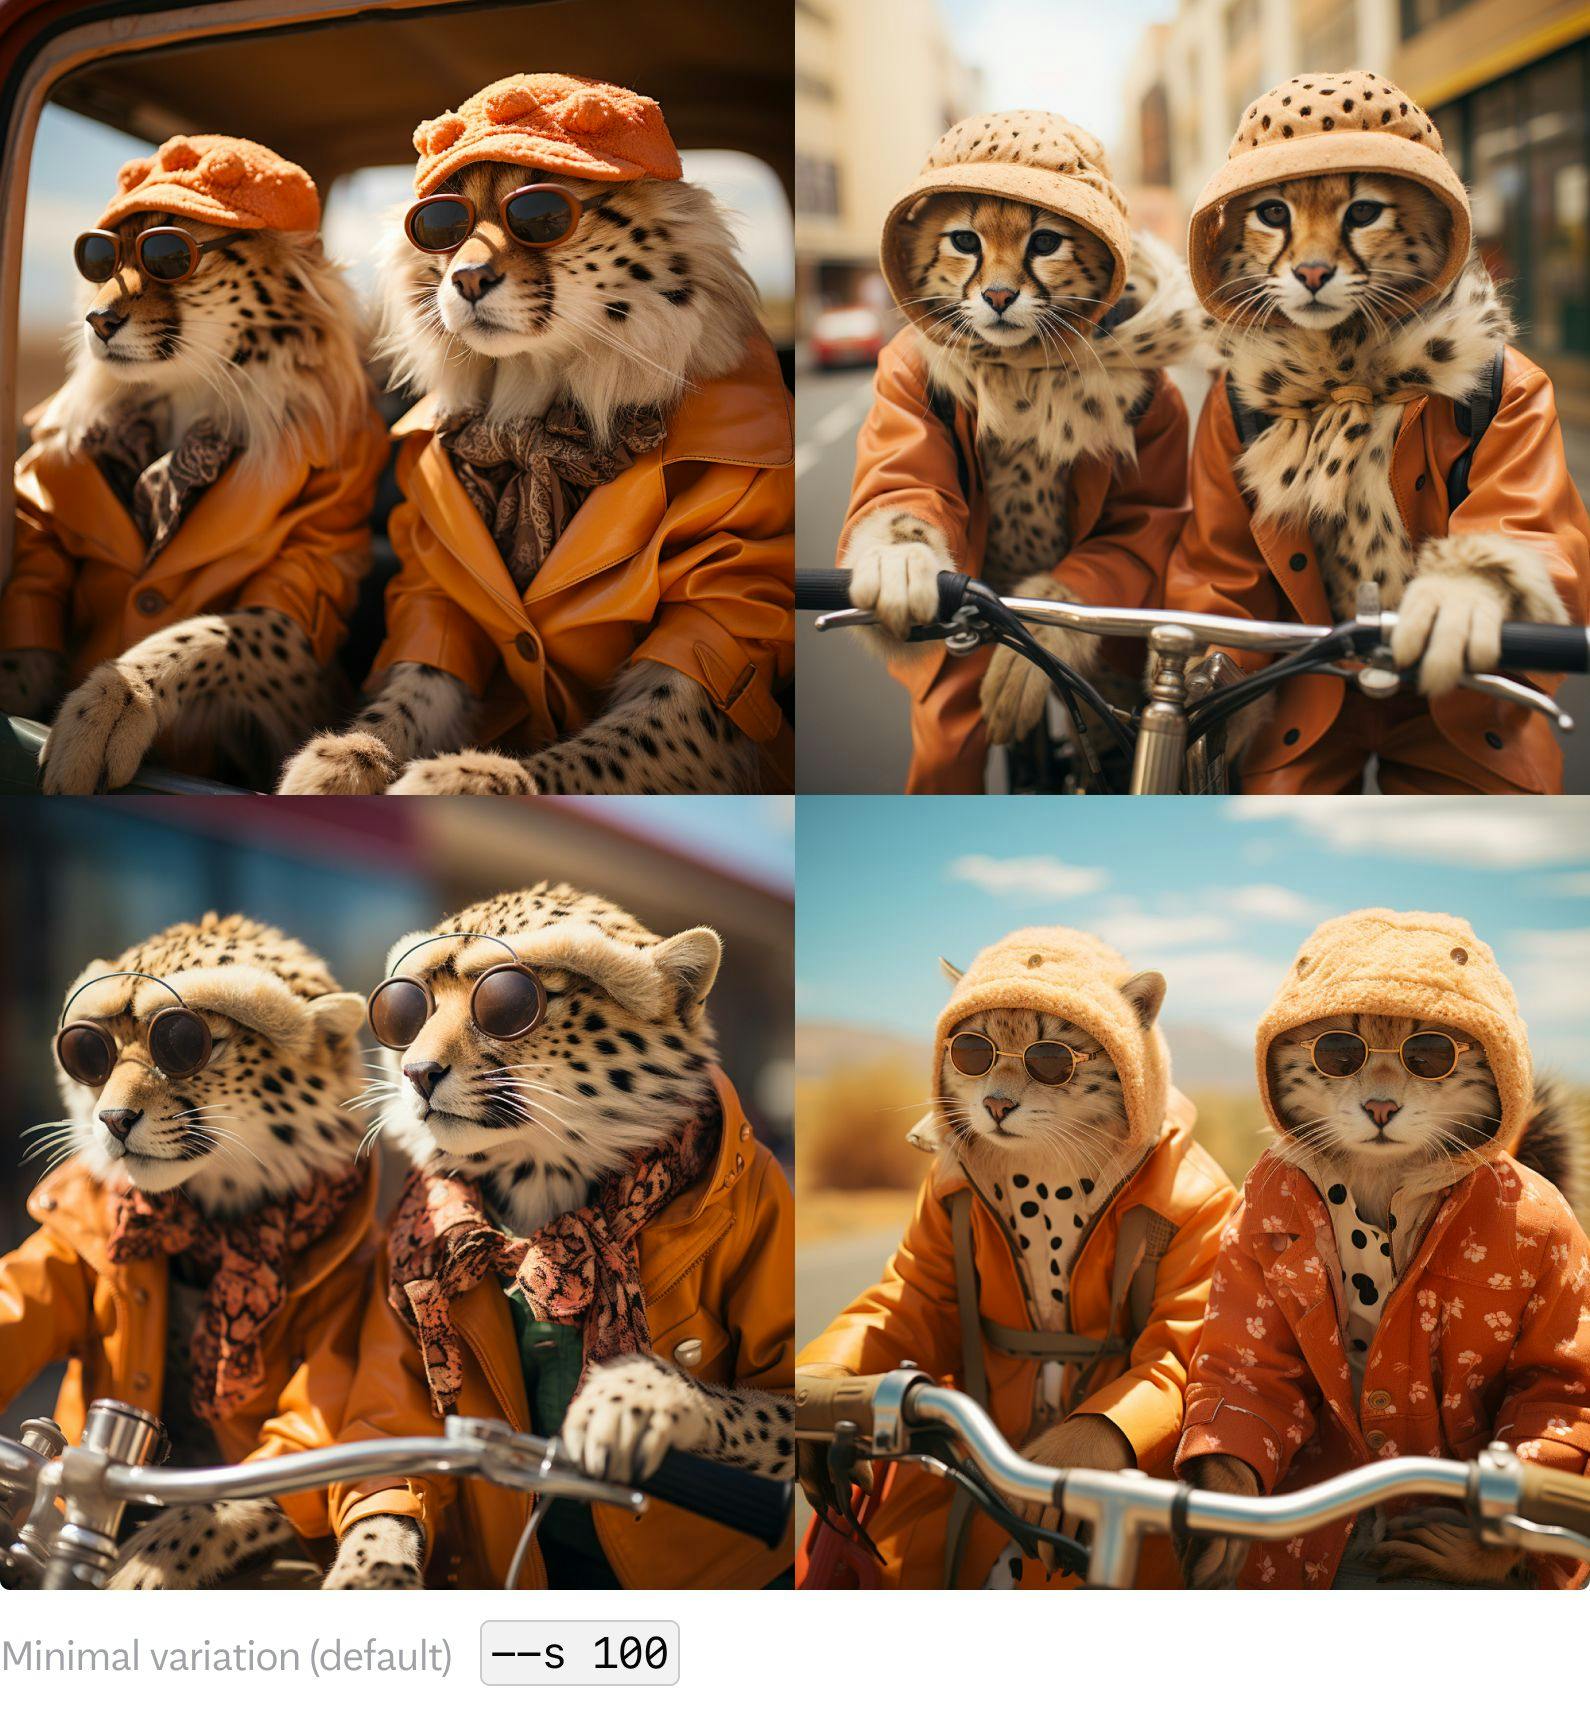 Minimal variation: Four similar pictures of cheetahs on a bike